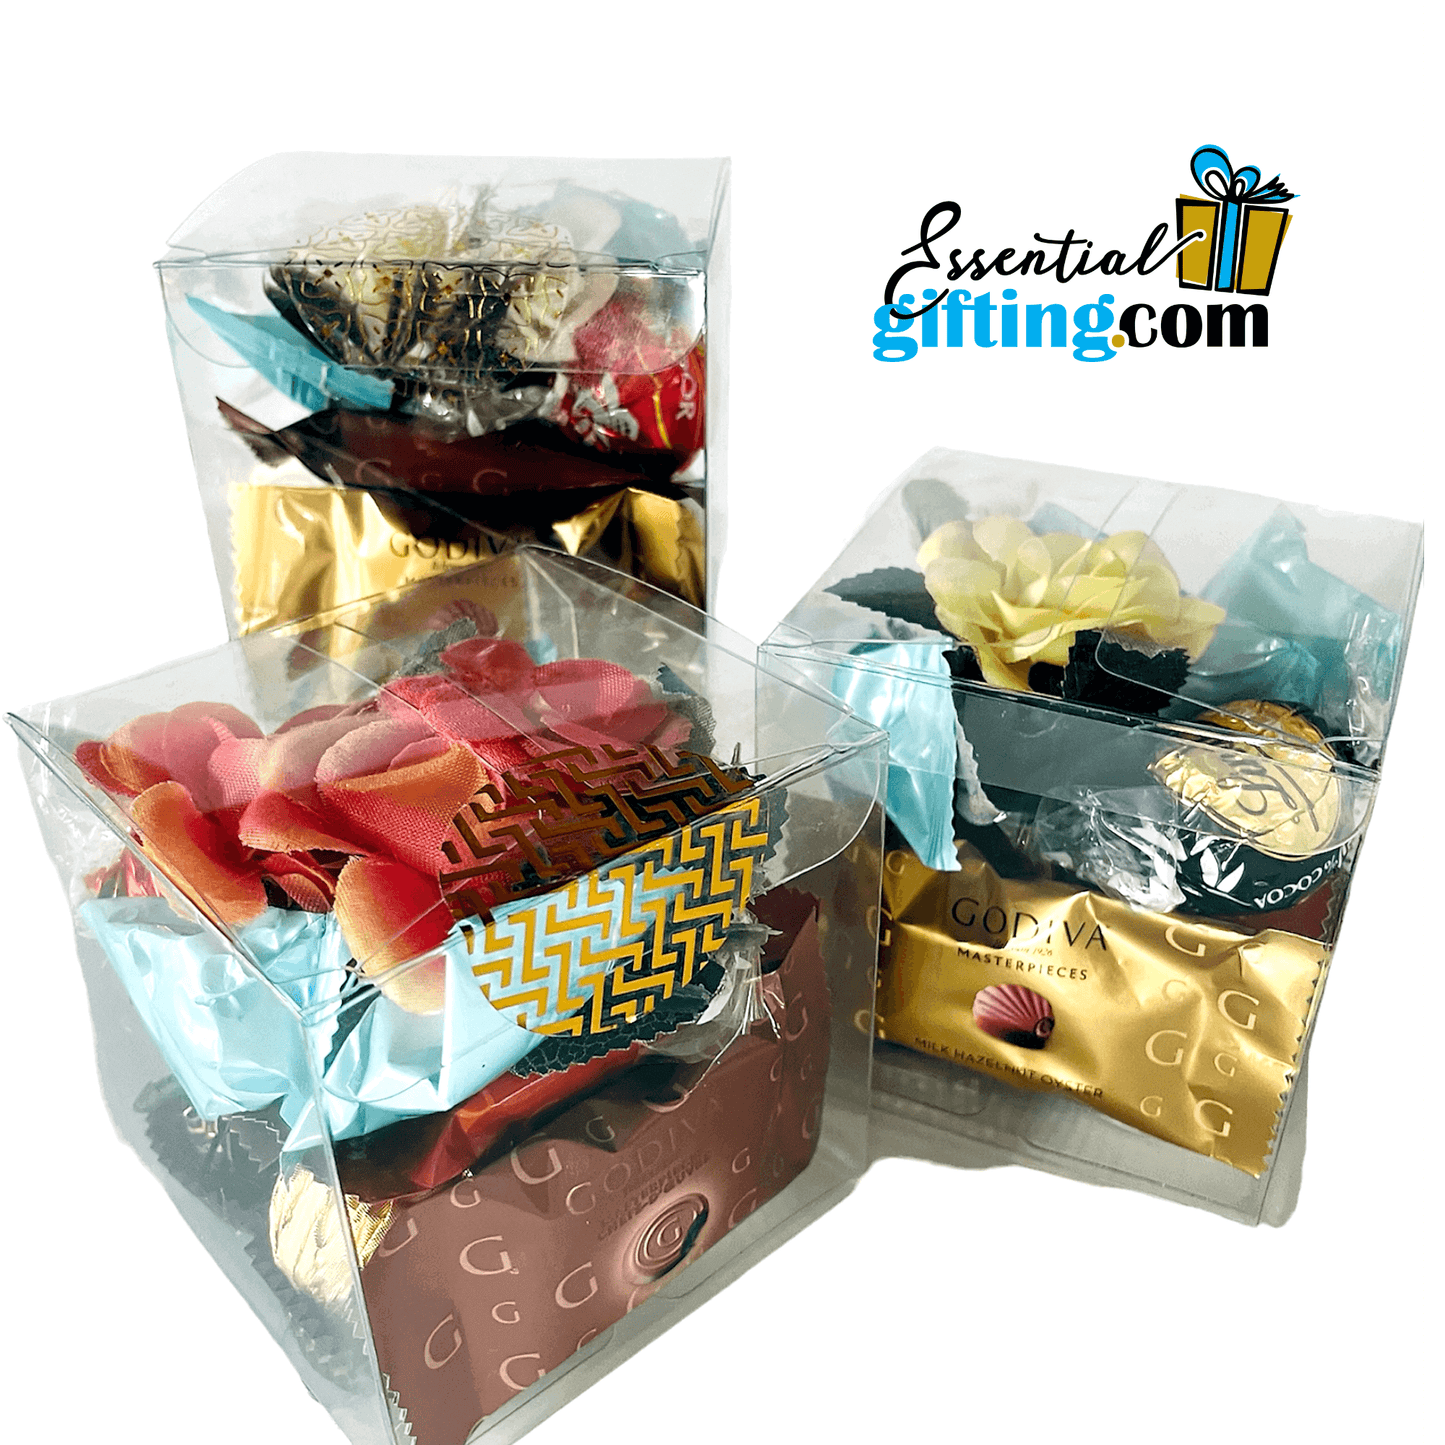 Assorted candy cubes in gift boxes with the Essentialgifting.com logo displayed.